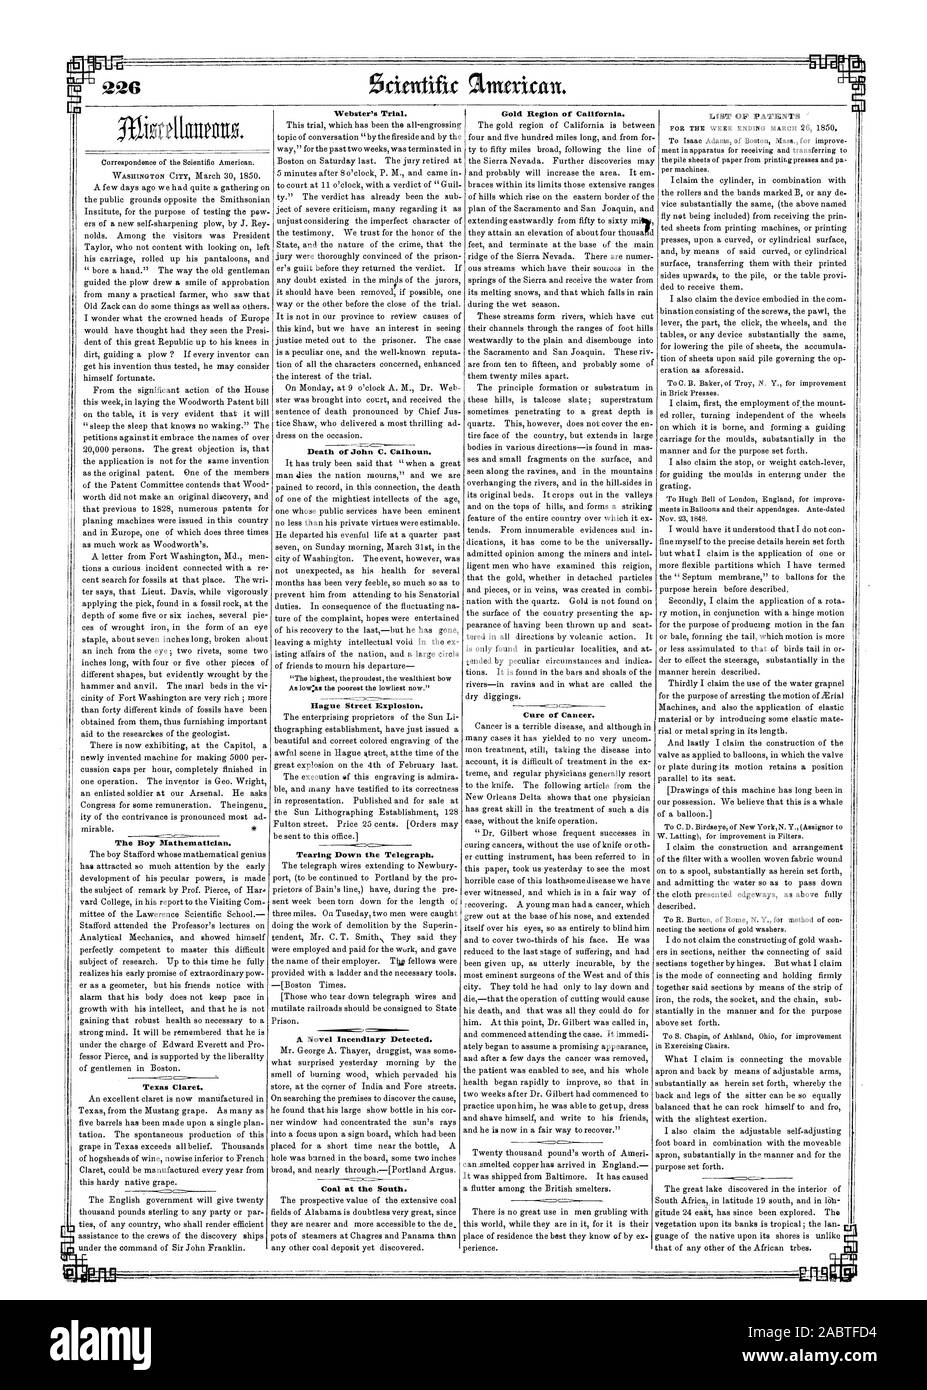 Tearing Down the Telegraph. A Novel Incendiary Detected. Coal at the South. Cure of Cancer. LIST OF PATENTS To Isaac Adams of Boston Mass. for improve ment in apparatus for receiving and transferring t the pile sheets of paper from printir4 presses and pa per machines. To 0. B. Baker of Troy N. Y. for improvement in Brick Presses. To Hugh Bell of London England for improve ments inBalloons and their appendages. Ante-dated Nov. 23 1848. To C. D. Birdseye of New YorkN. Y. (Assignor t W. Letting) for improvement in Filters. To R. Burton of Rome N. Y. for method of con necting the sections of gold Stock Photo